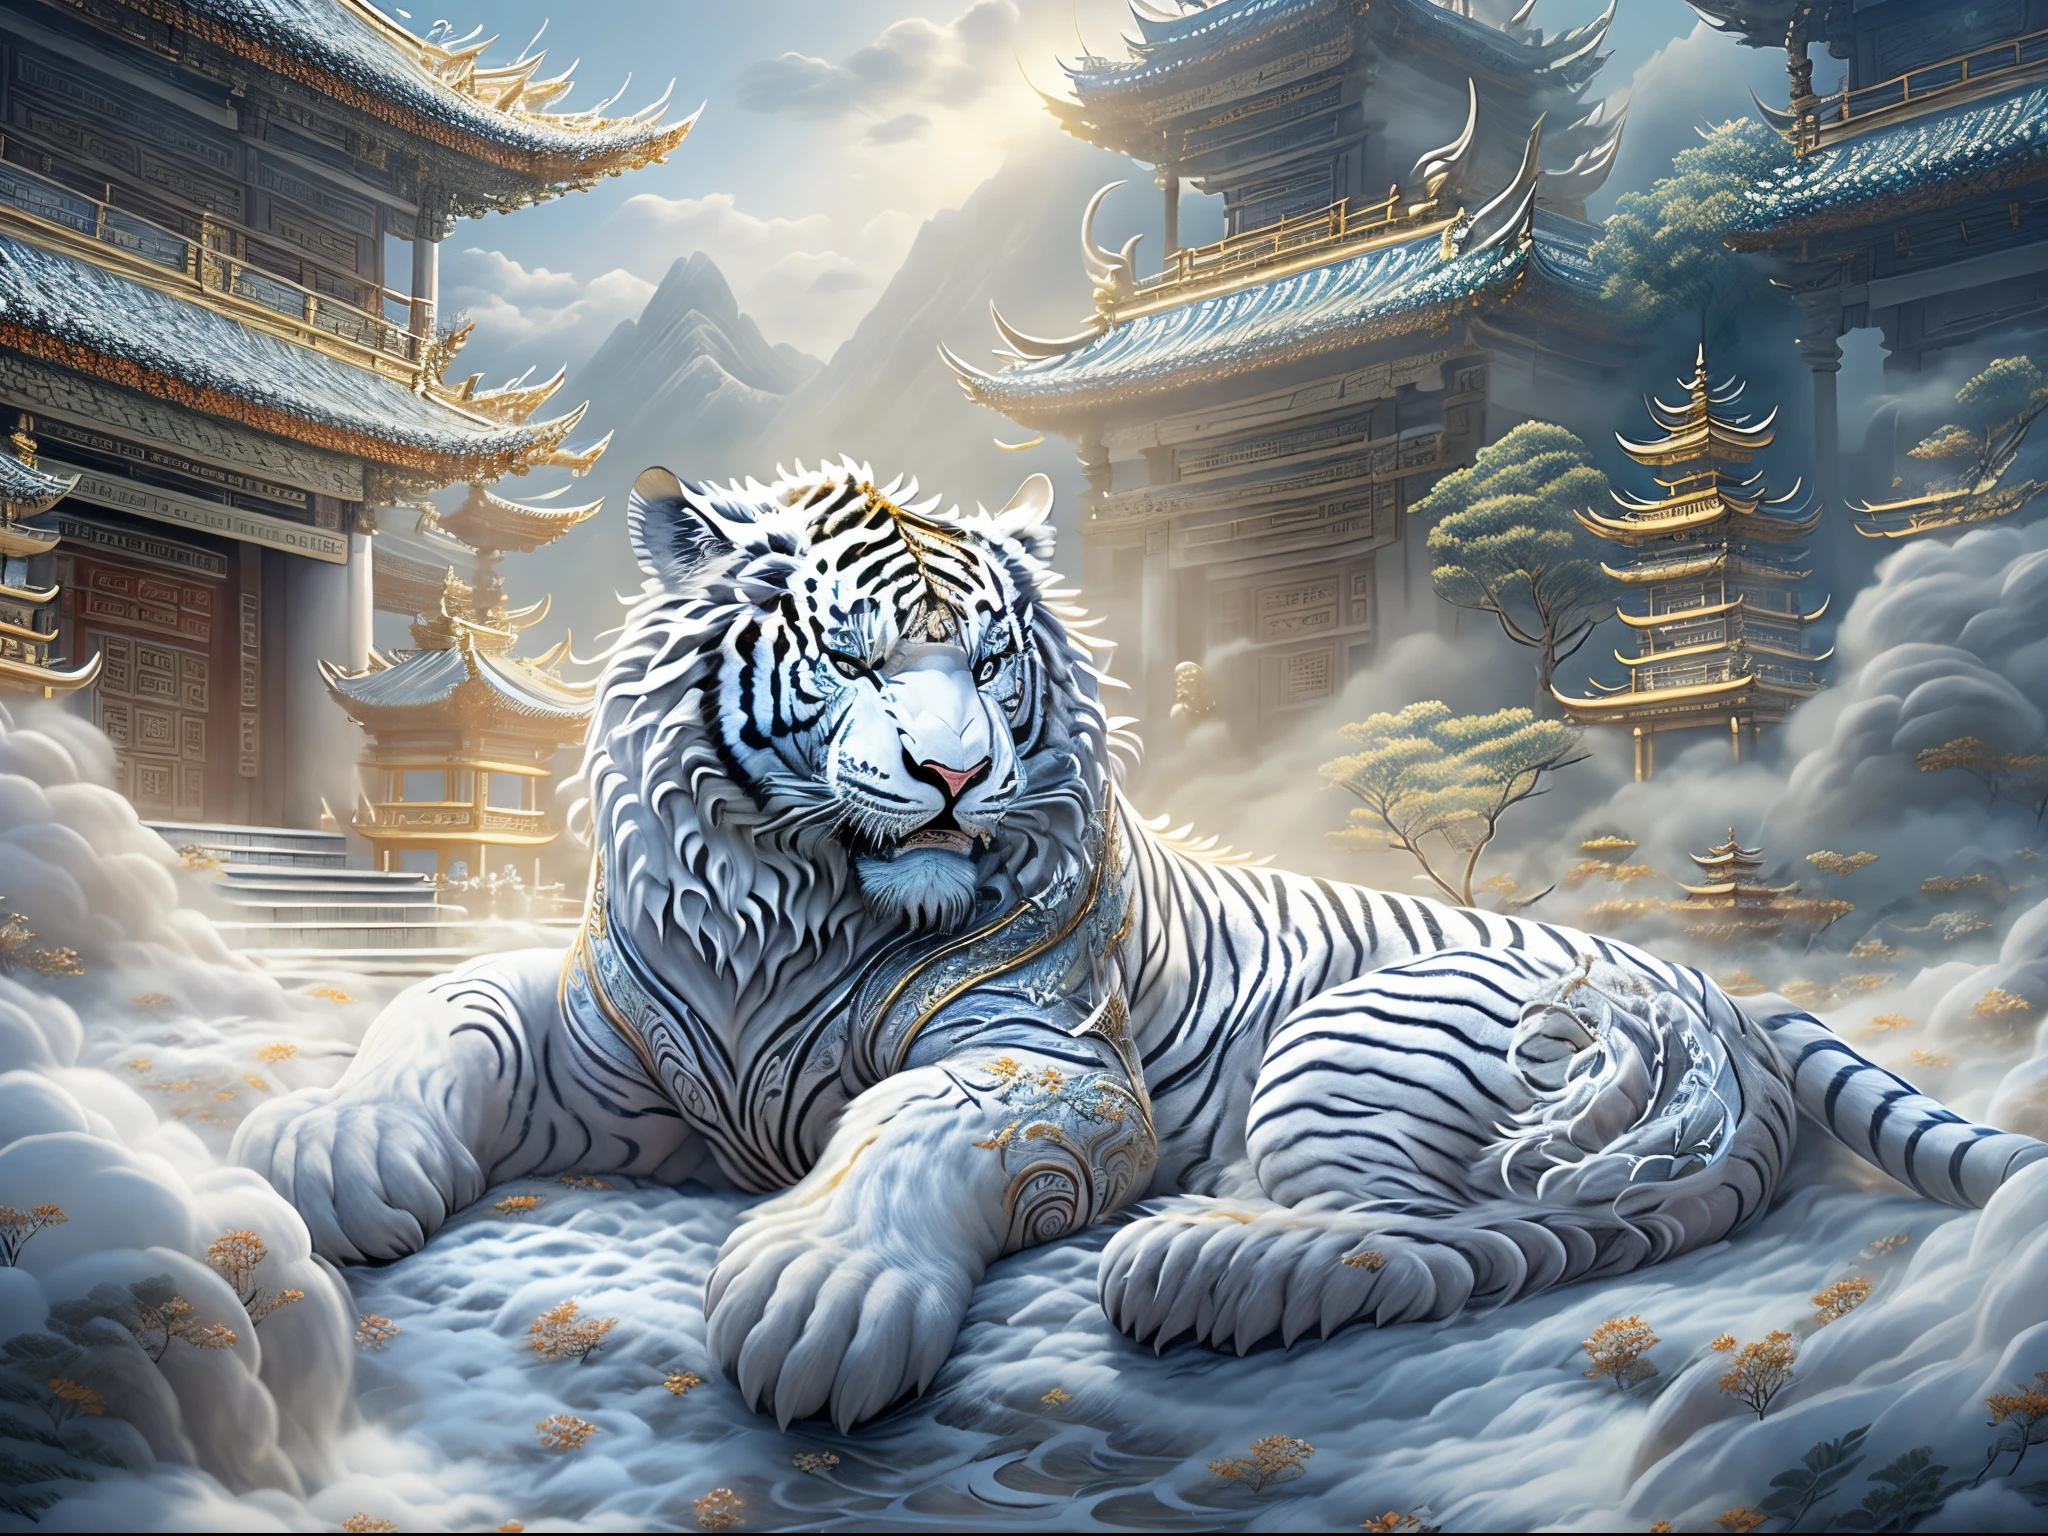 (Best quality at best,tmasterpiece, iintricate,hyper-detailing，Extremely detailed CG unified wallpaper) , dahuangdongjing，A mythical beast in Chinese mythology(the white tiger),White tiger resembles a huge white tiger，Huge and powerful。It has a majestic body and sharp claws，The whole body is covered with fur as white as snow，White tigers usually have a pair of short horns on their heads，And both eyes radiate light like lightning，Surrounded by lightning，Surrounded by white clouds，dreamland wonderland、Genting Heavenly Palace，，The mountain is very steep，strange rocks，Fantastical，Ogre、square、Riding，Faraway view，(Best quality at best,tmasterpiece, iintricate,hyper-detailing，RAW photogr,8k，hyper HD,Ultra-high resolution,Realisticstyle,A cinematic scene, Focus sharp,dramatic lights,Extremely detailed CG unified wallpaper，Chinese color，The colors are bright，bright，Traditional Chinese elements，（（Ancient murals）），Illustrative myths，Fuyao Legend，Dappled light，Hazy haze，Mystic aura，tmasterpiece，k hd，plethora of colors，detailed detail，Seven colors)